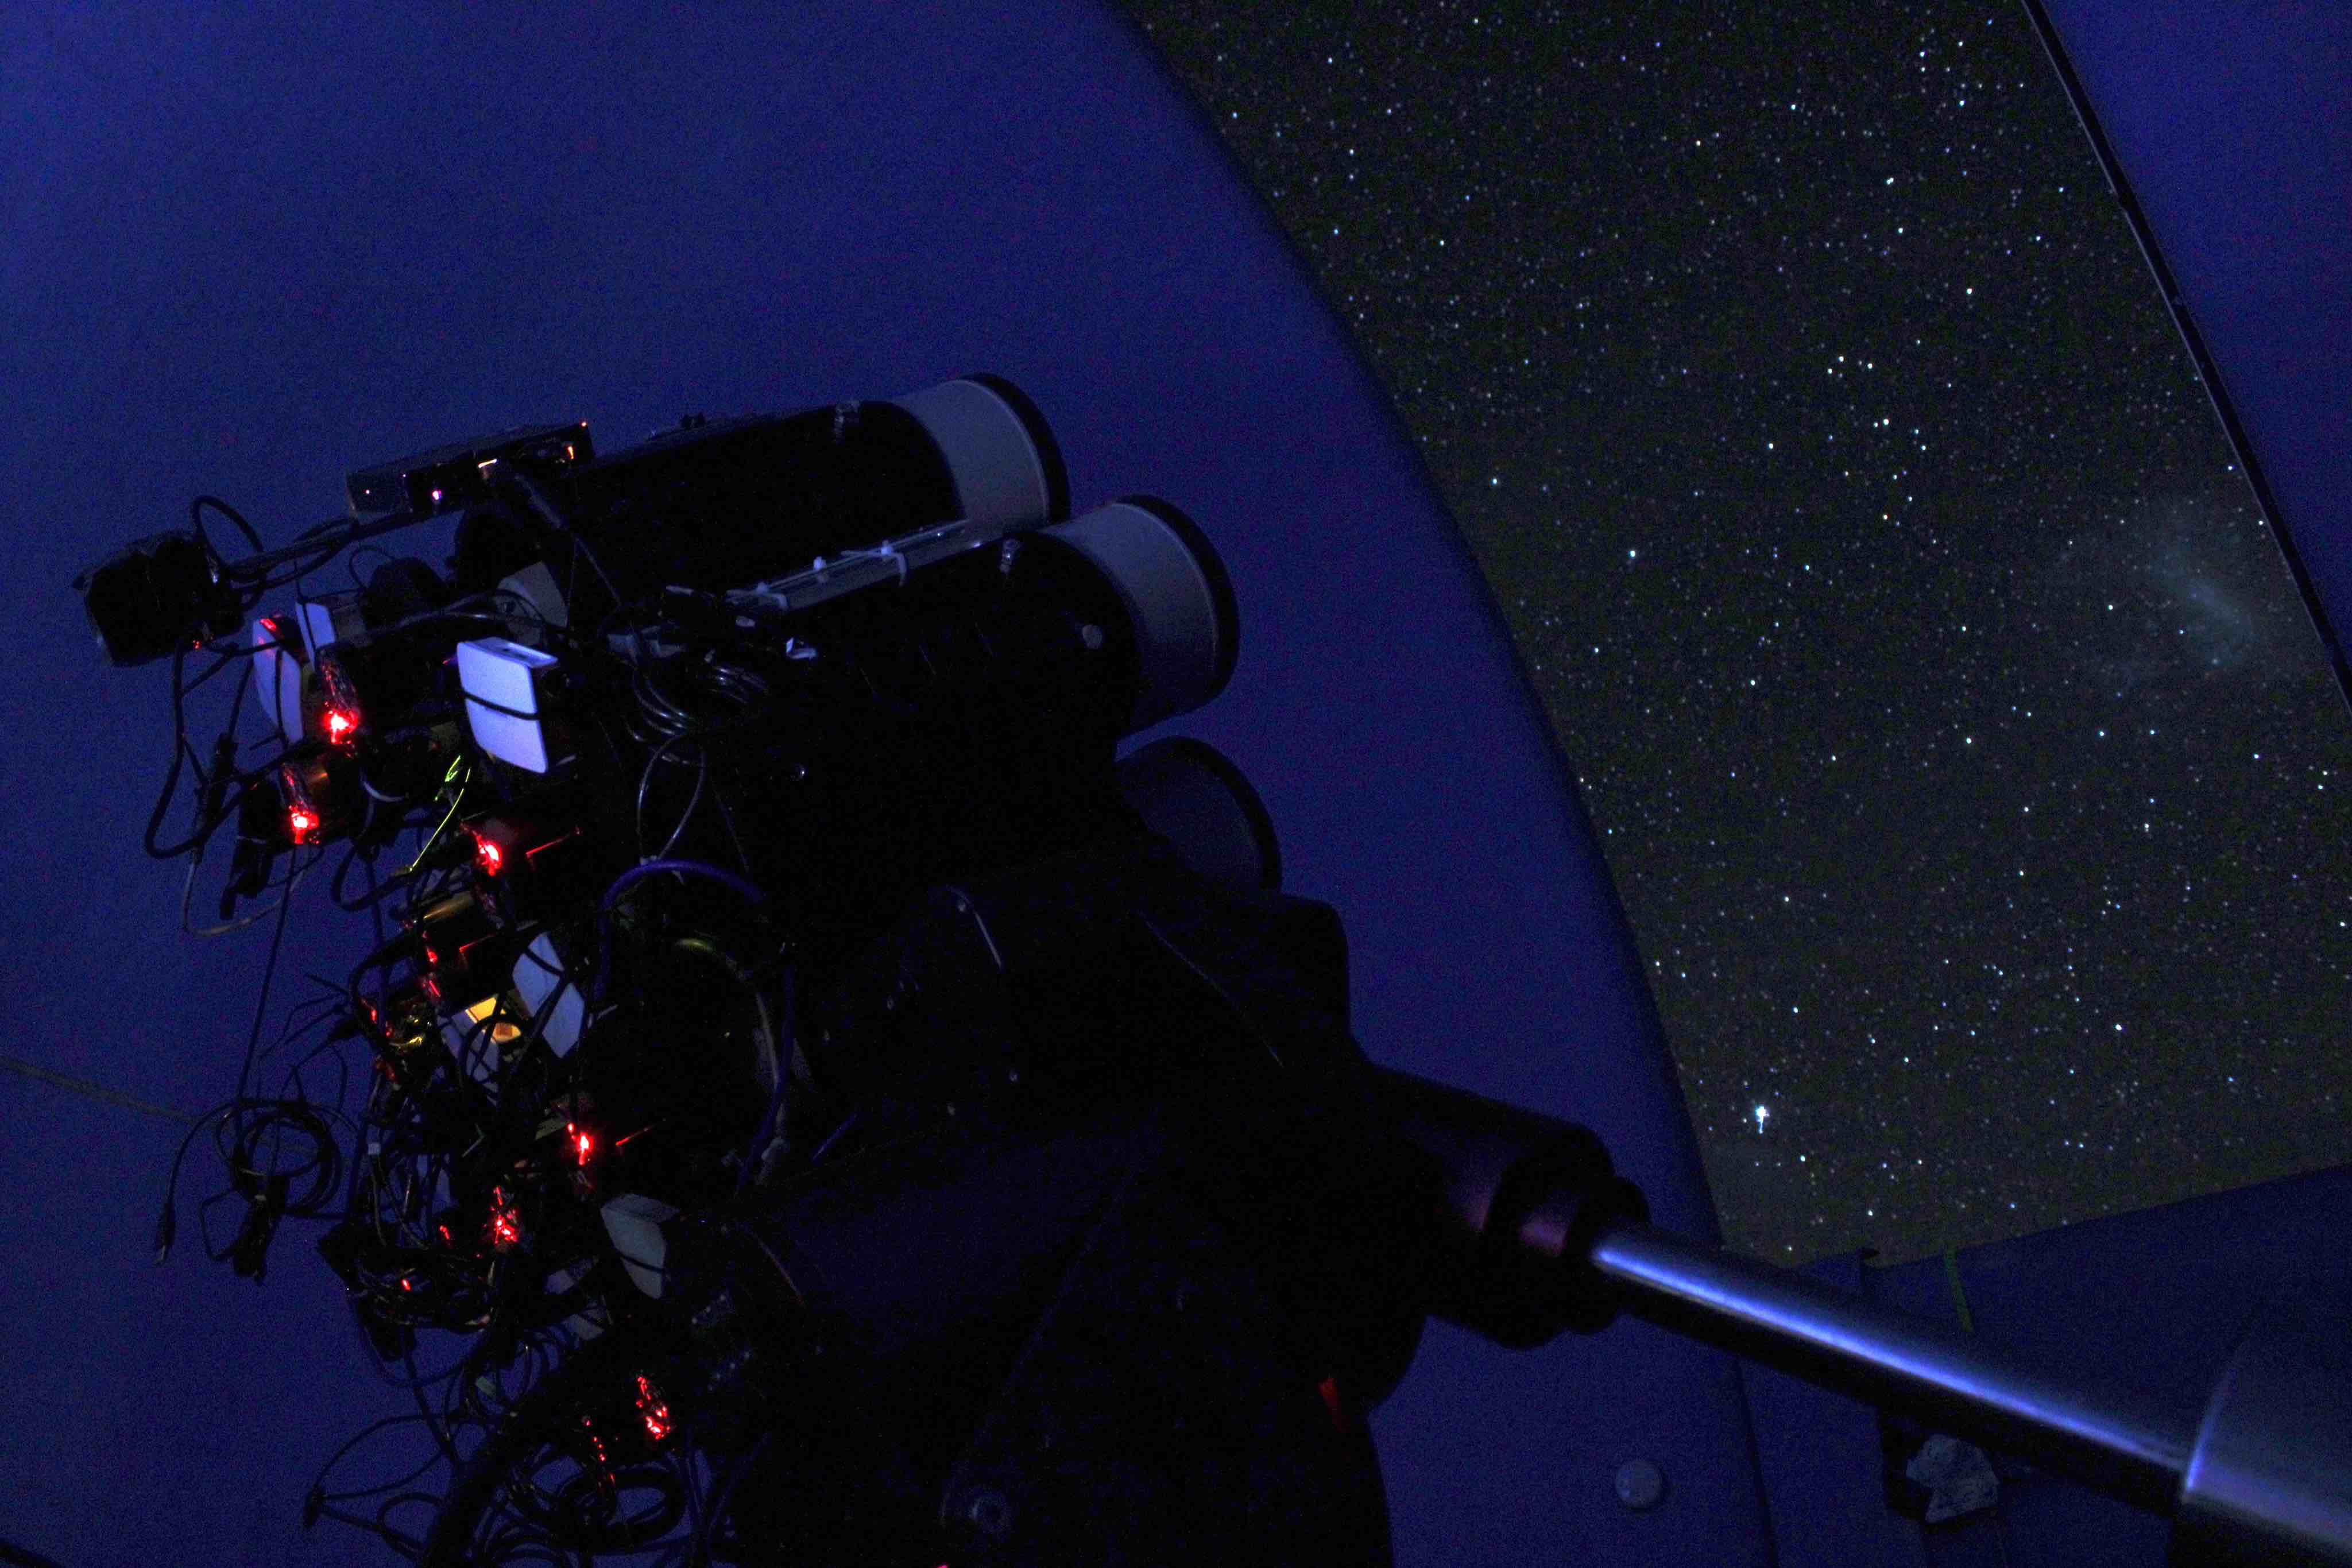 Huntsman Telescope pointed to the night sky